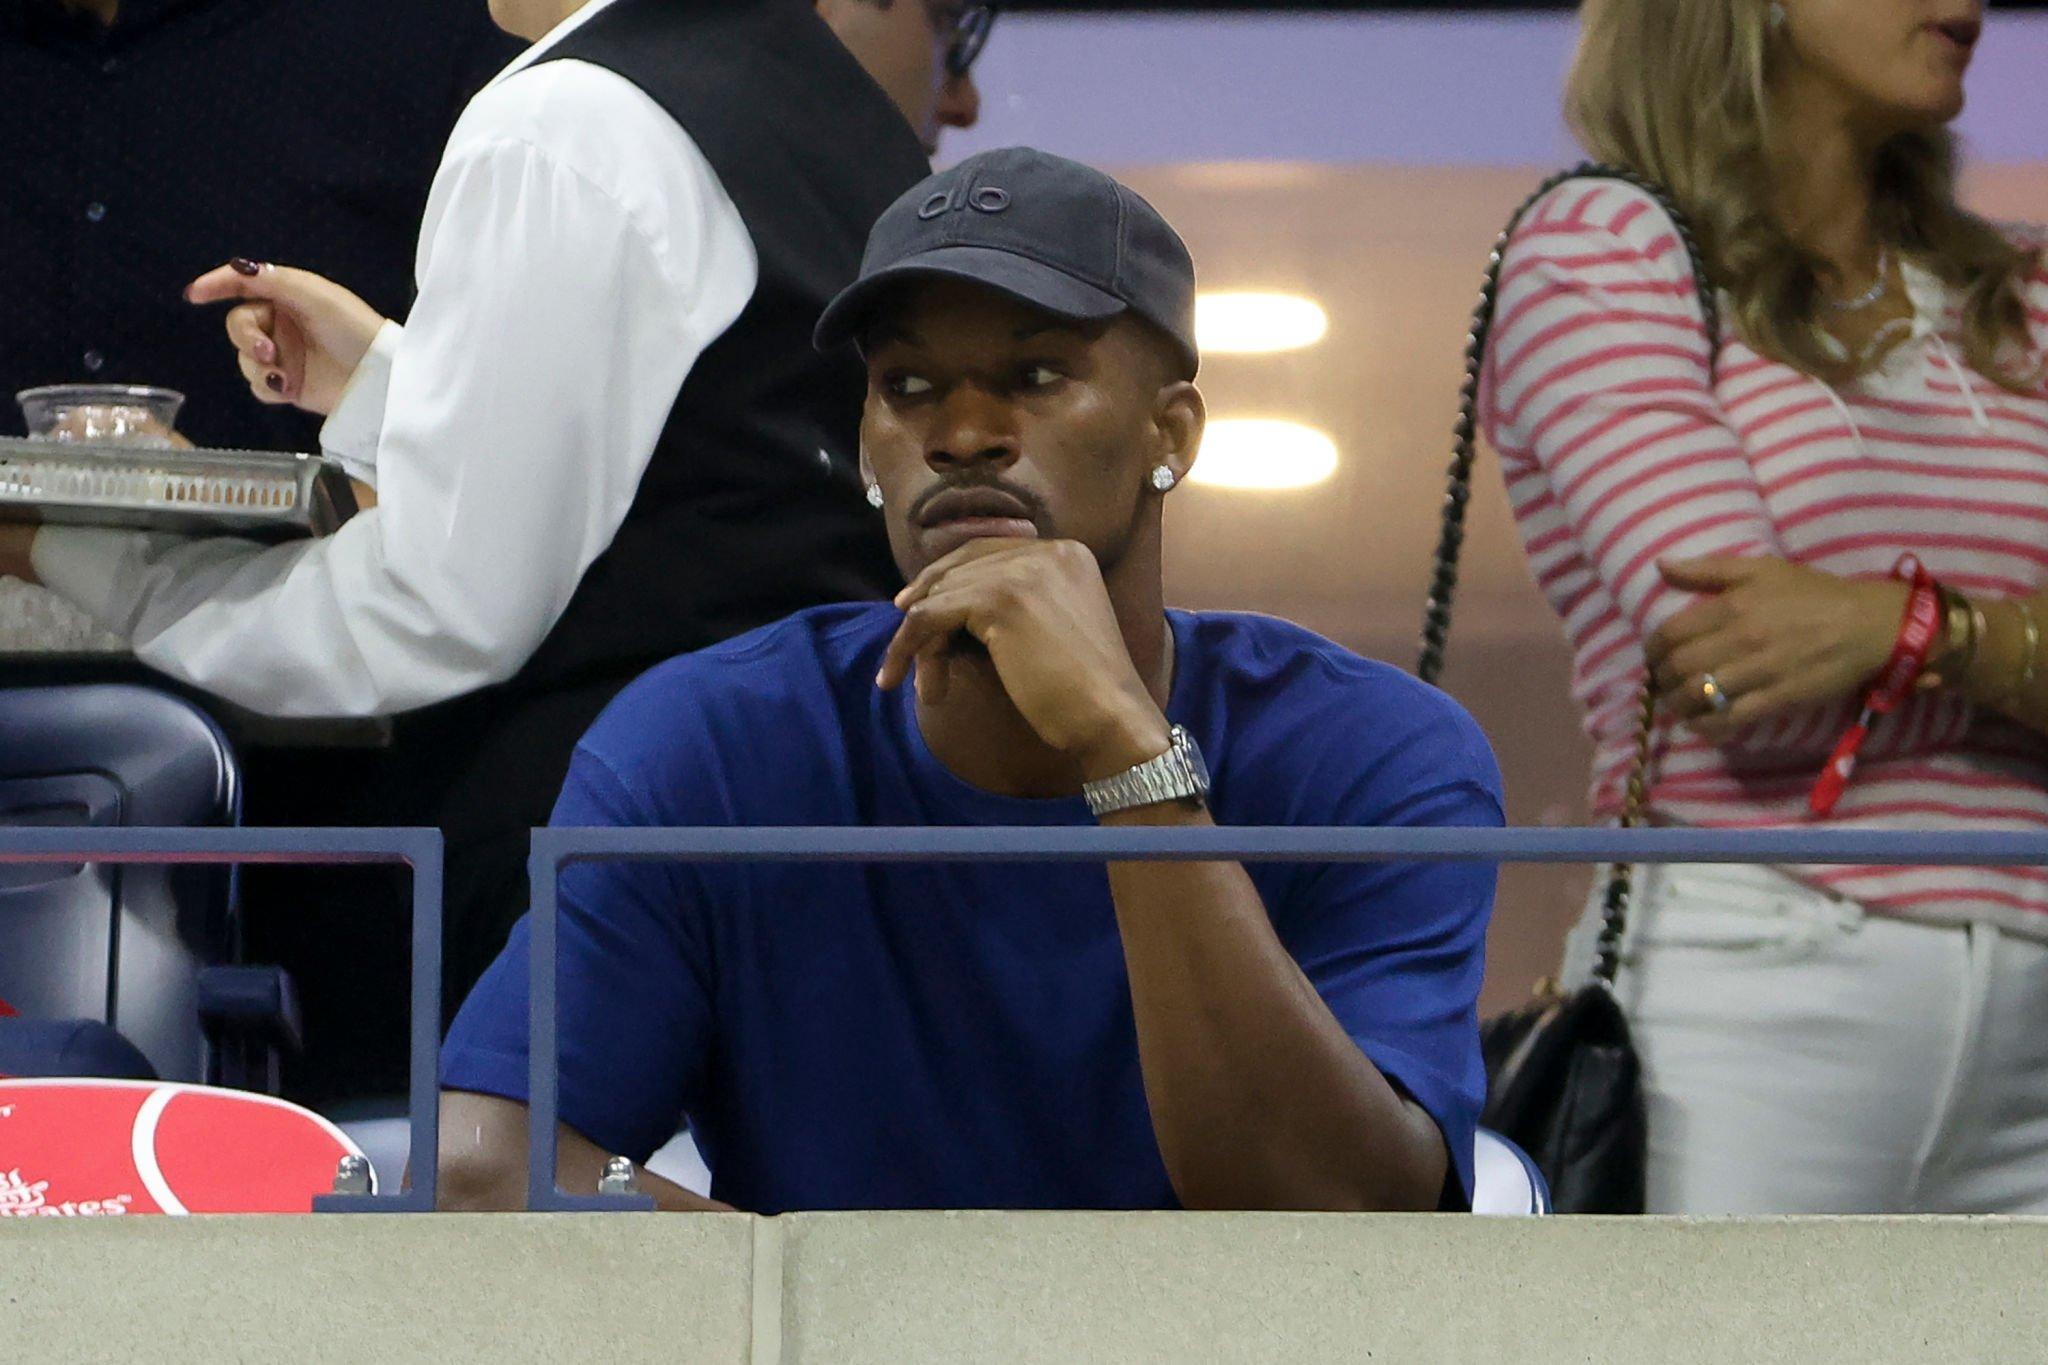 NEW YORK, NEW YORK - AUGUST 29: Jimmy Butler attends day two of the 2023 US Open at Arthur Ashe Stadium at the USTA Billie Jean King National Tennis Center on August 29, 2023 in the Flushing neighborhood of the Queens borough of New York City. (Photo by Jean Catuffe/GC Images)